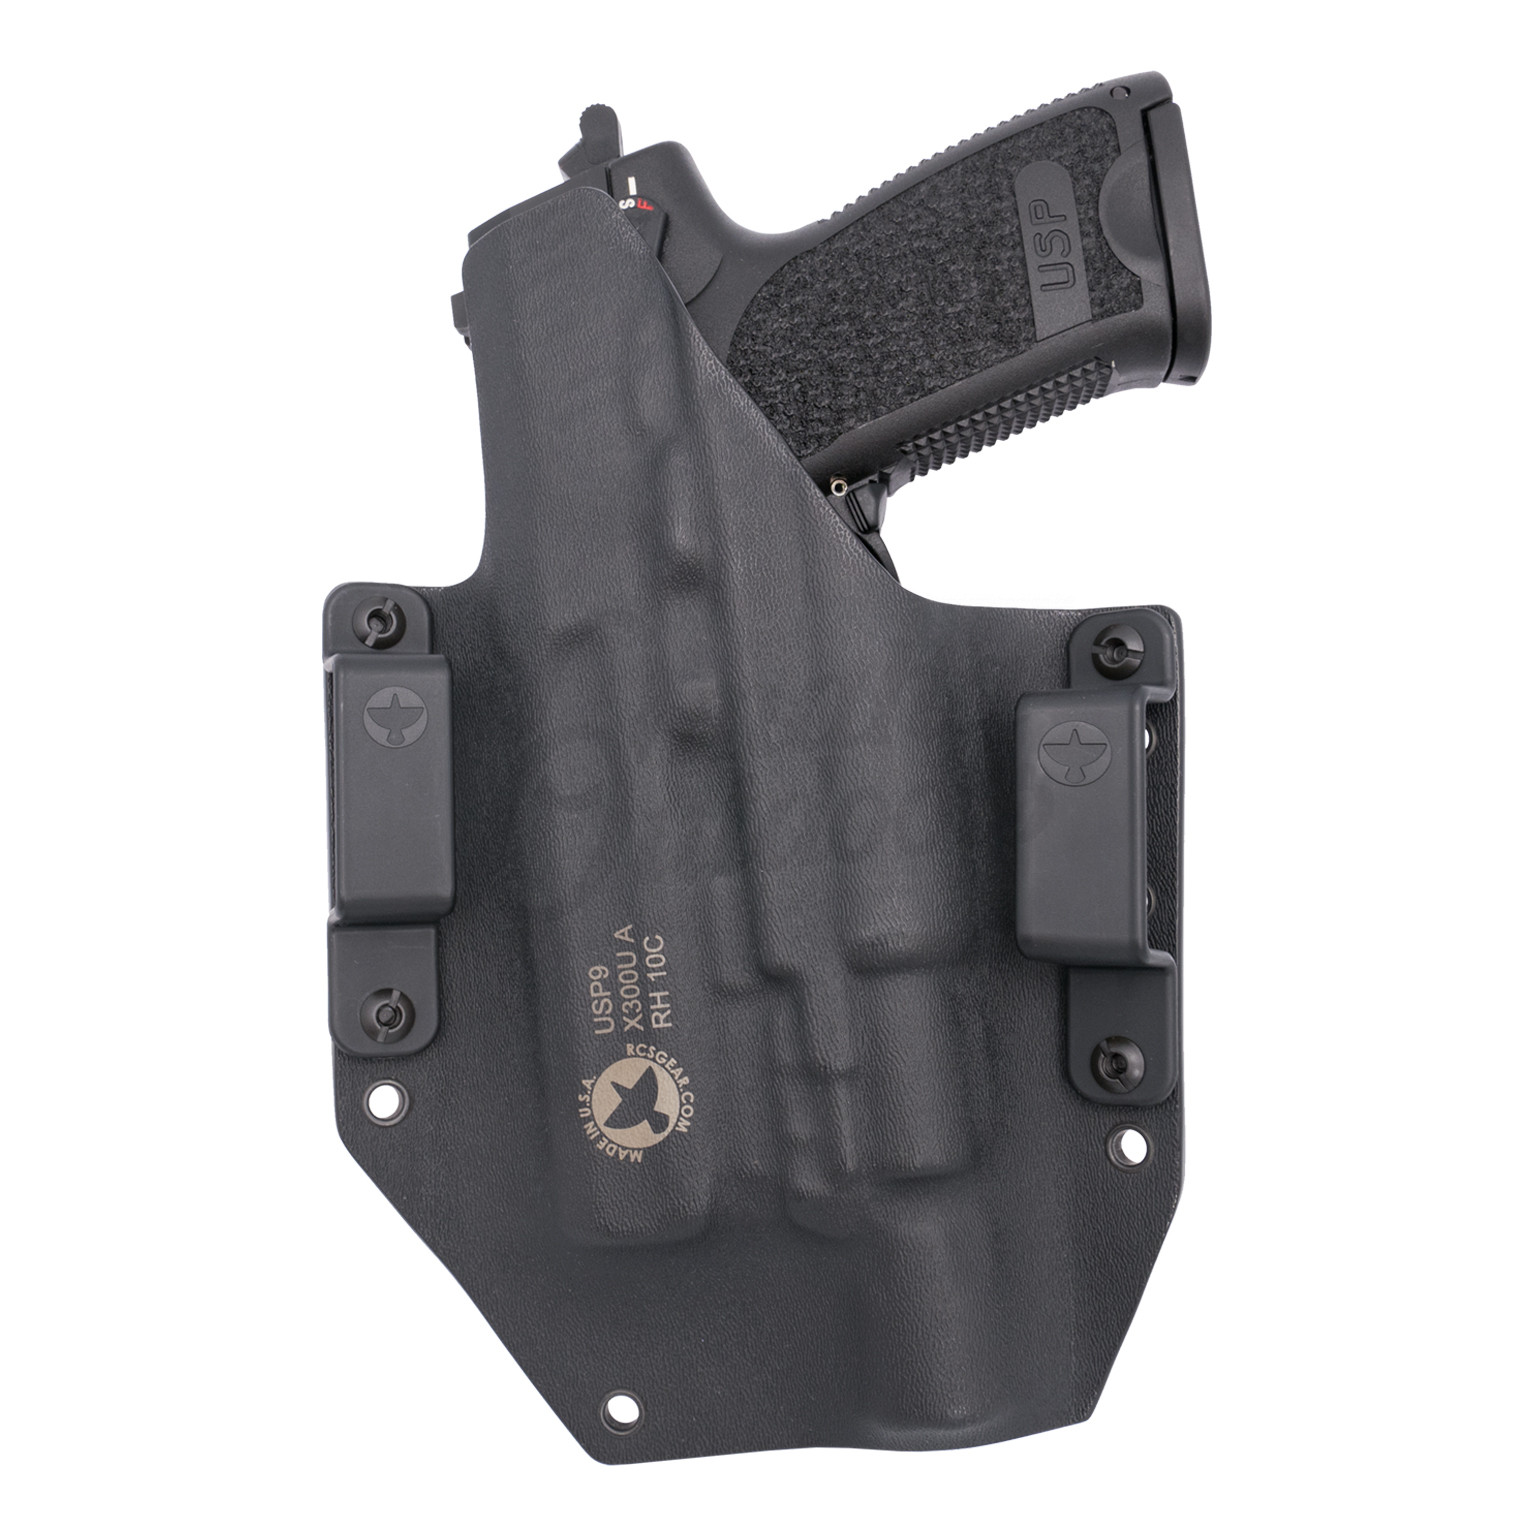 1.5" Details about   Raven OWB Holster Fits Glock 17/19 with X300 Ultra A/B Ambi Black Nylon 